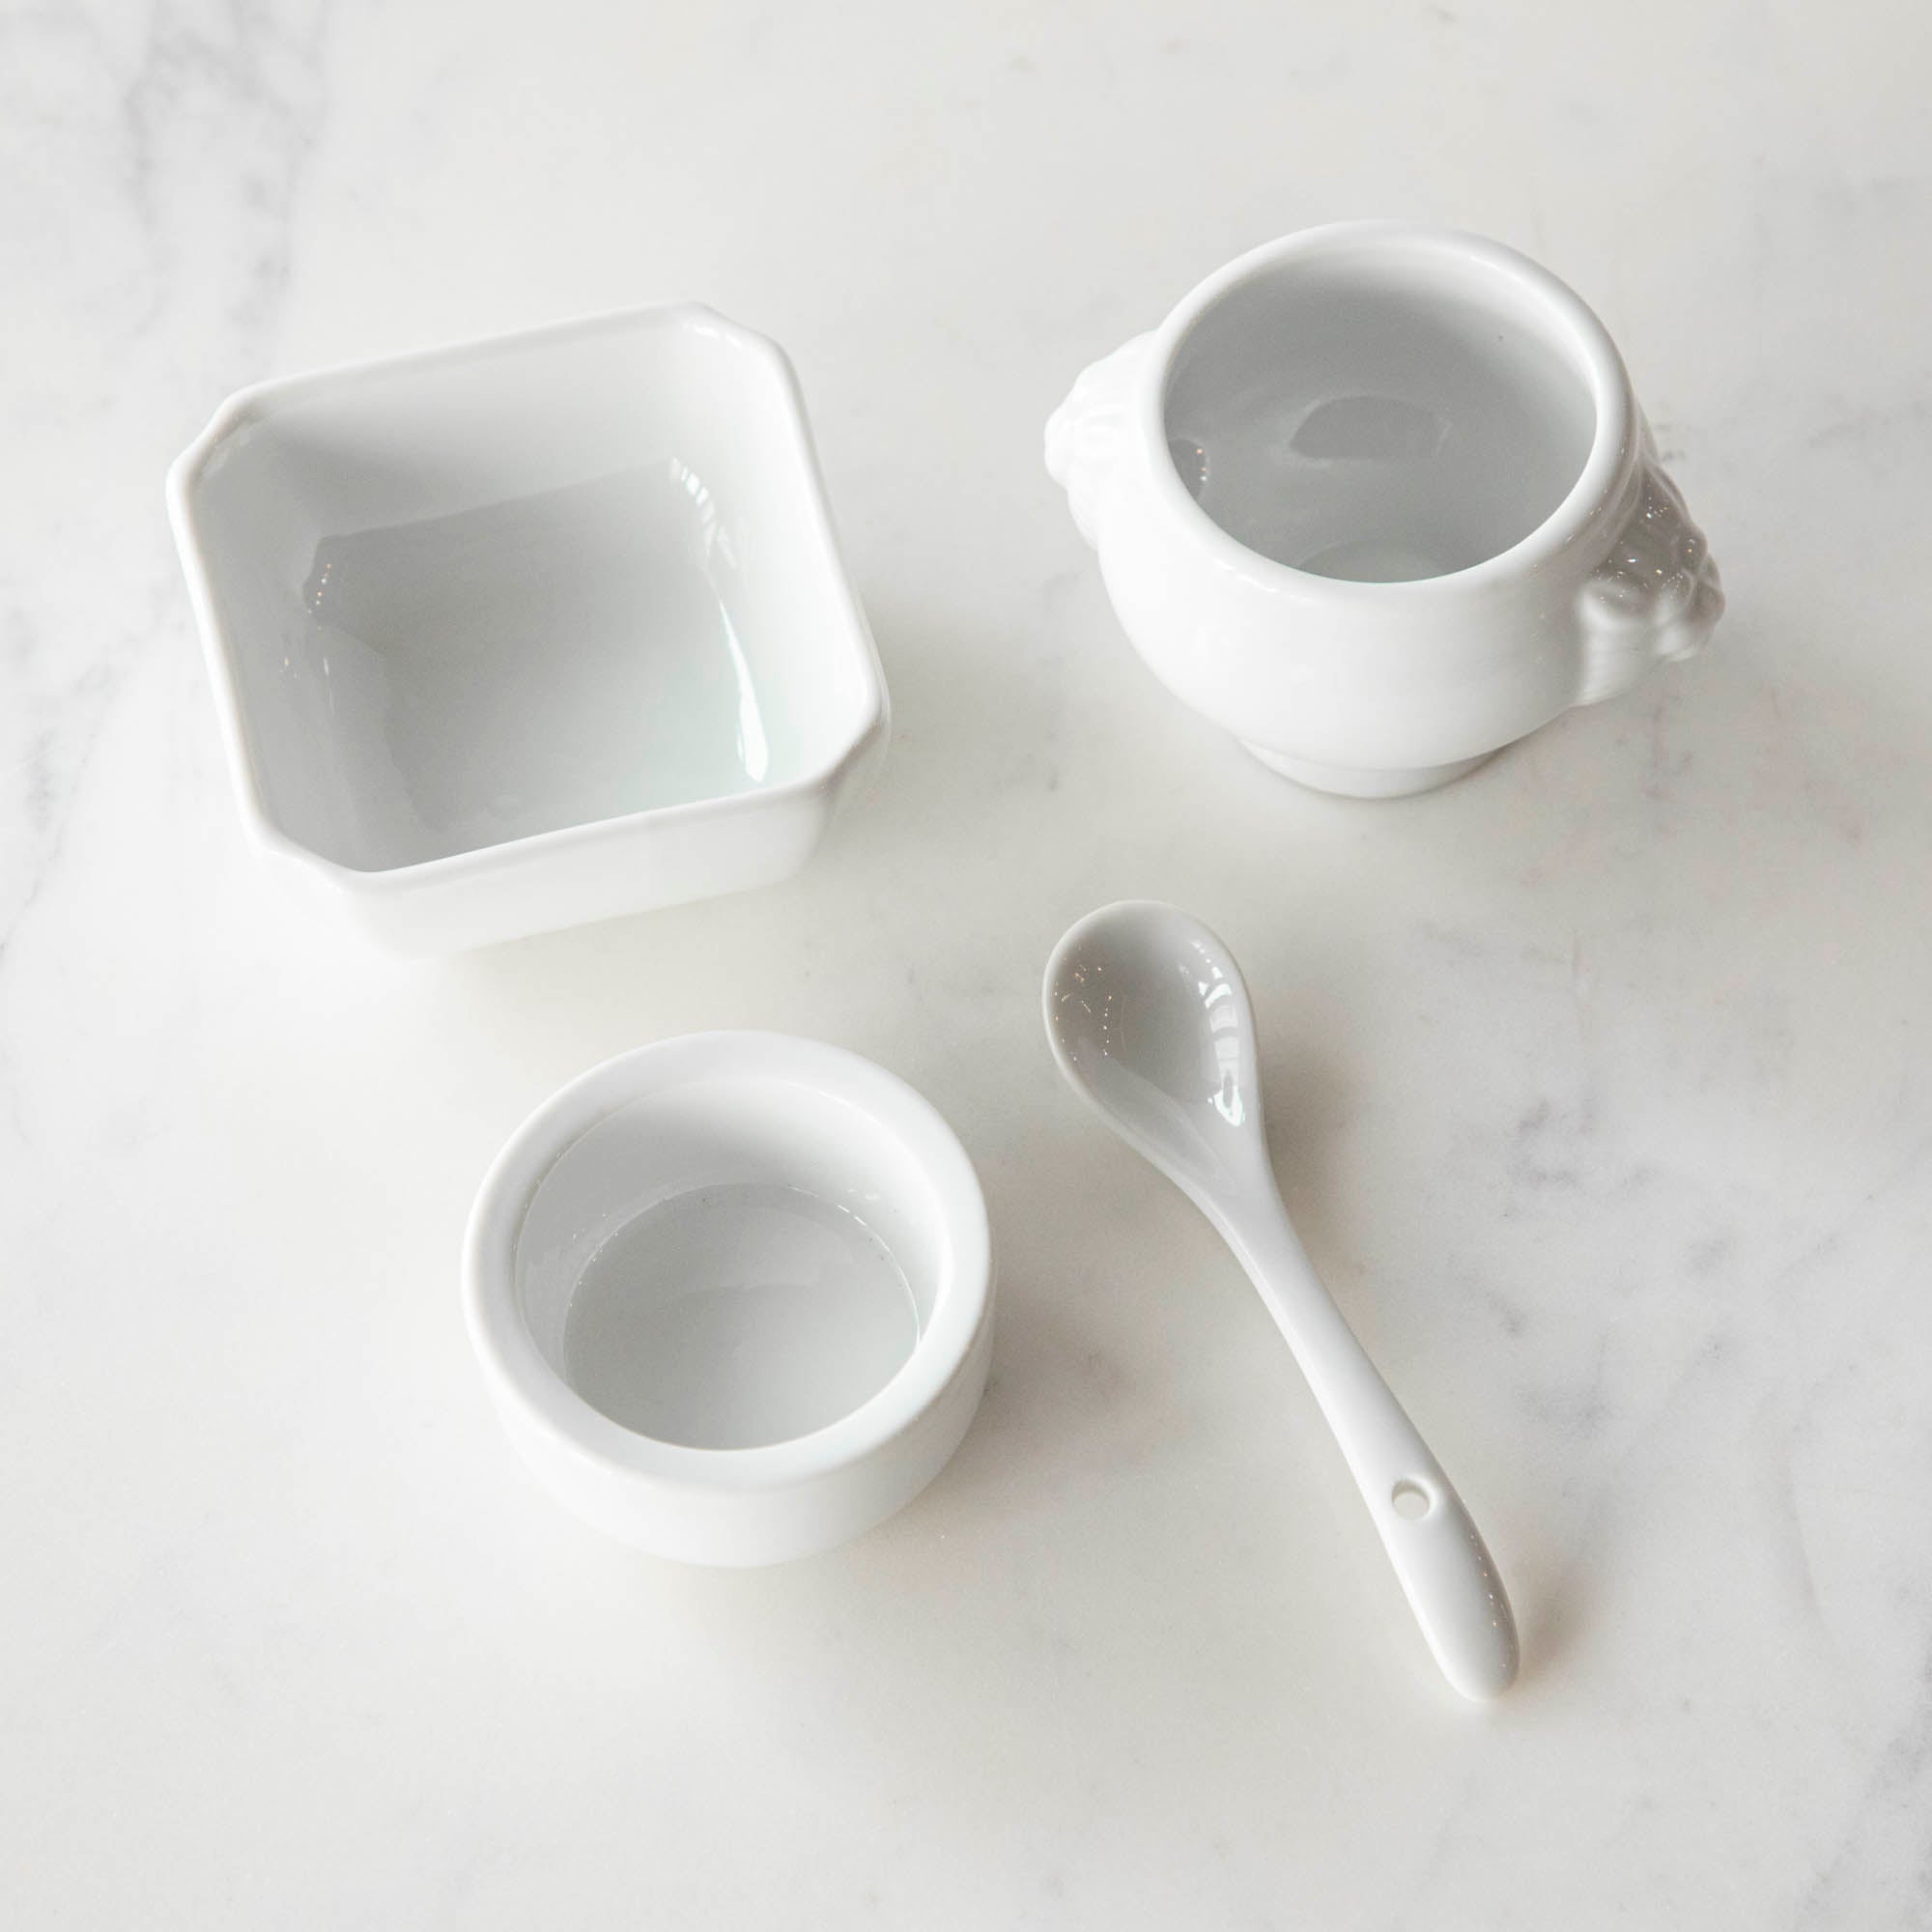 Three White Porcelain Mini Bowls with assorted spices and a spoon on a marble surface by BIA.